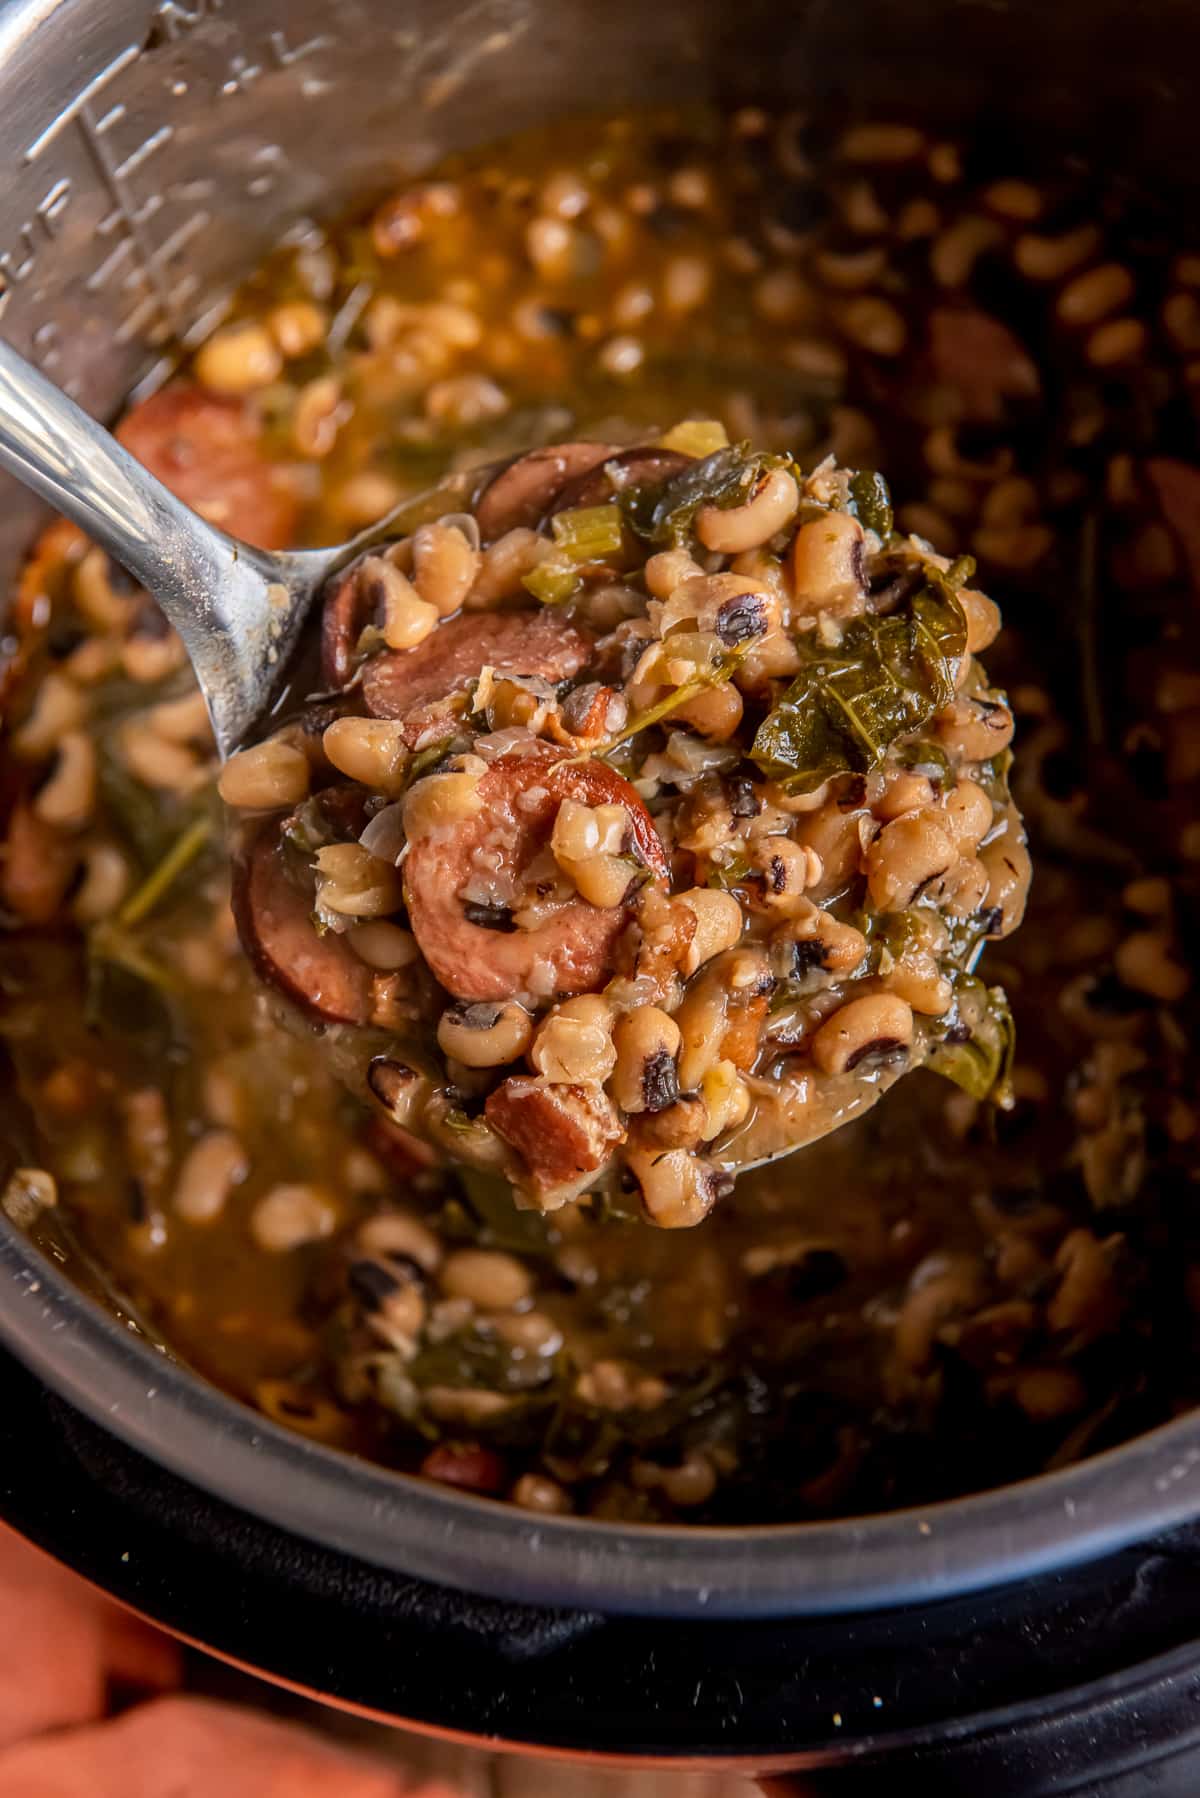 A ladle scooping black eyed peas with collard greens and sausage from an Instant Pot.